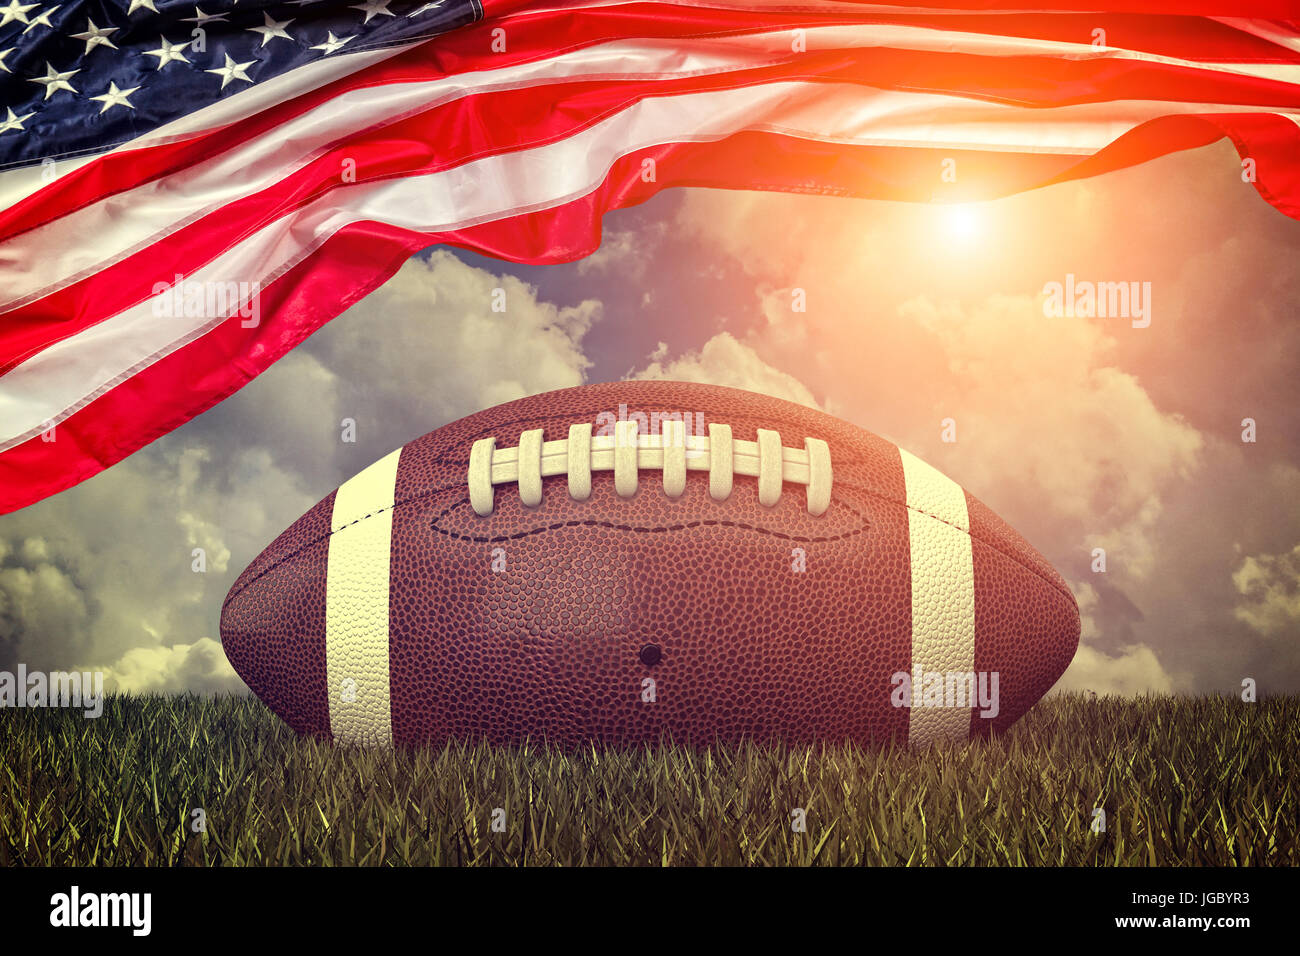 american football ball old glory and sky 3d rendering image Stock Photo